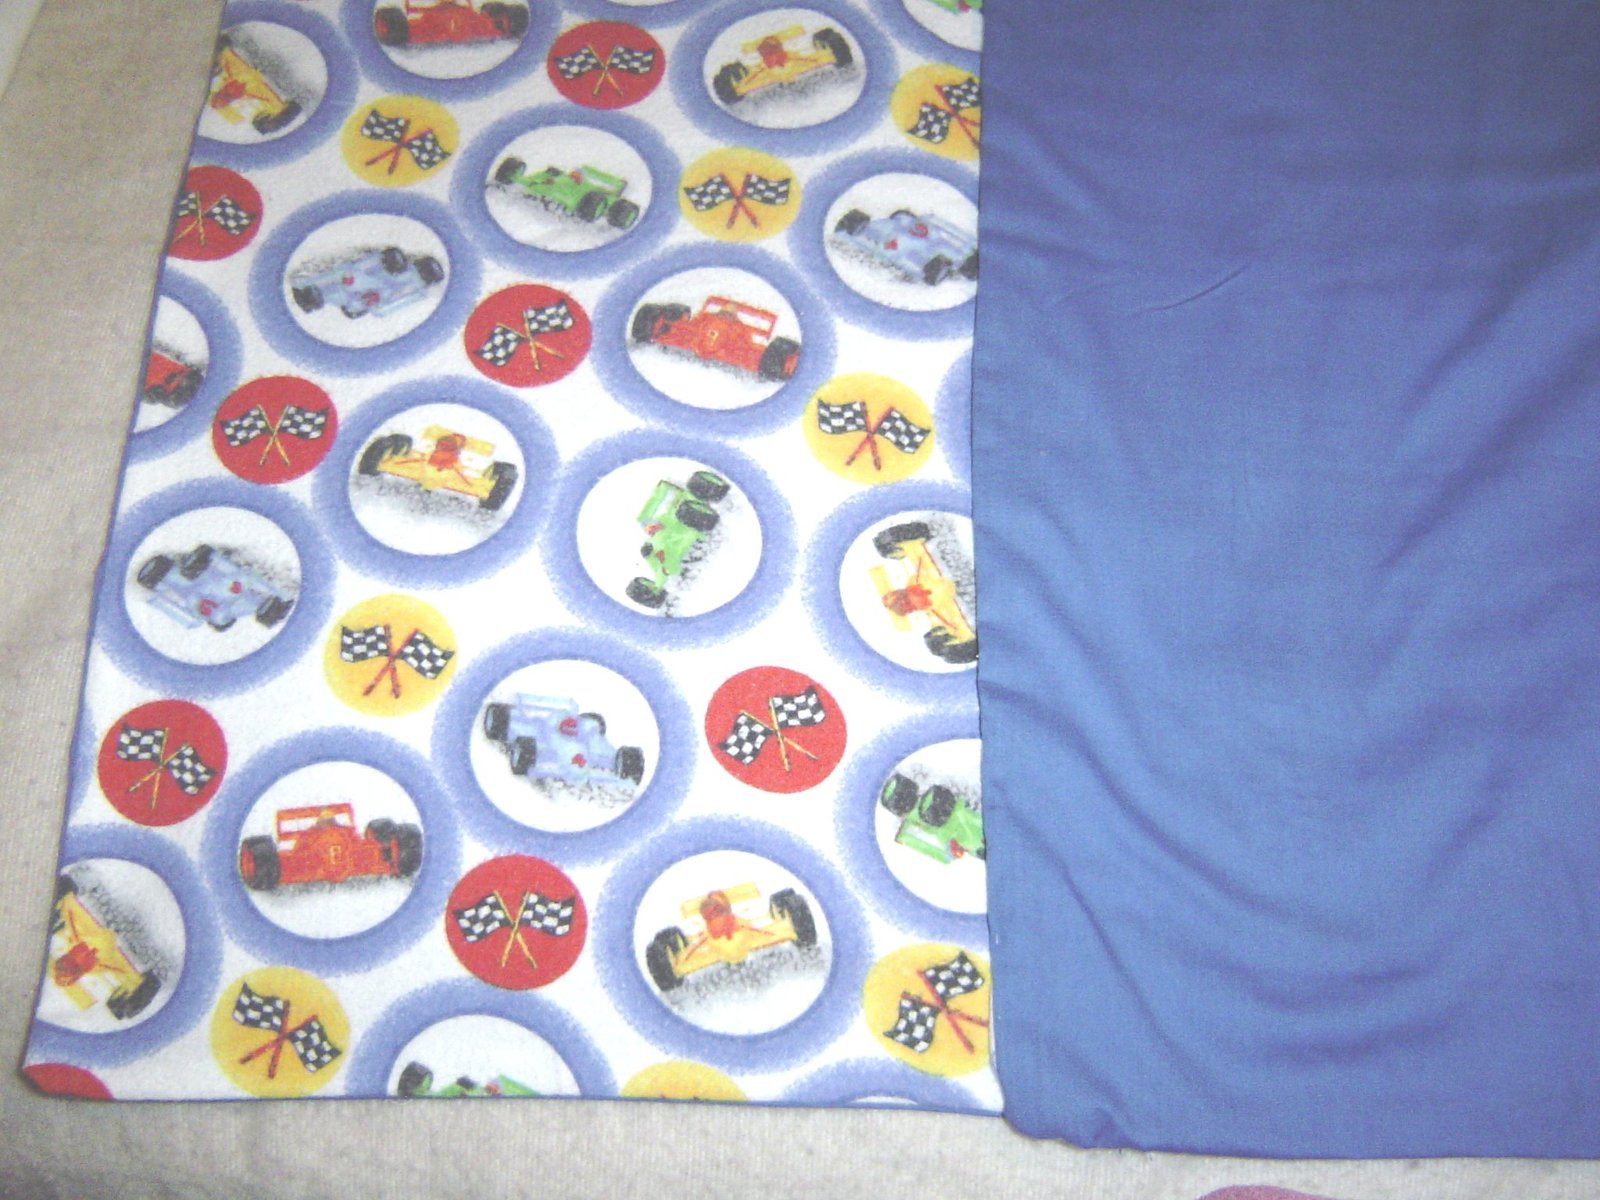 New Flannel Race Car and Blue Baby Blanket Handmade - $19.99